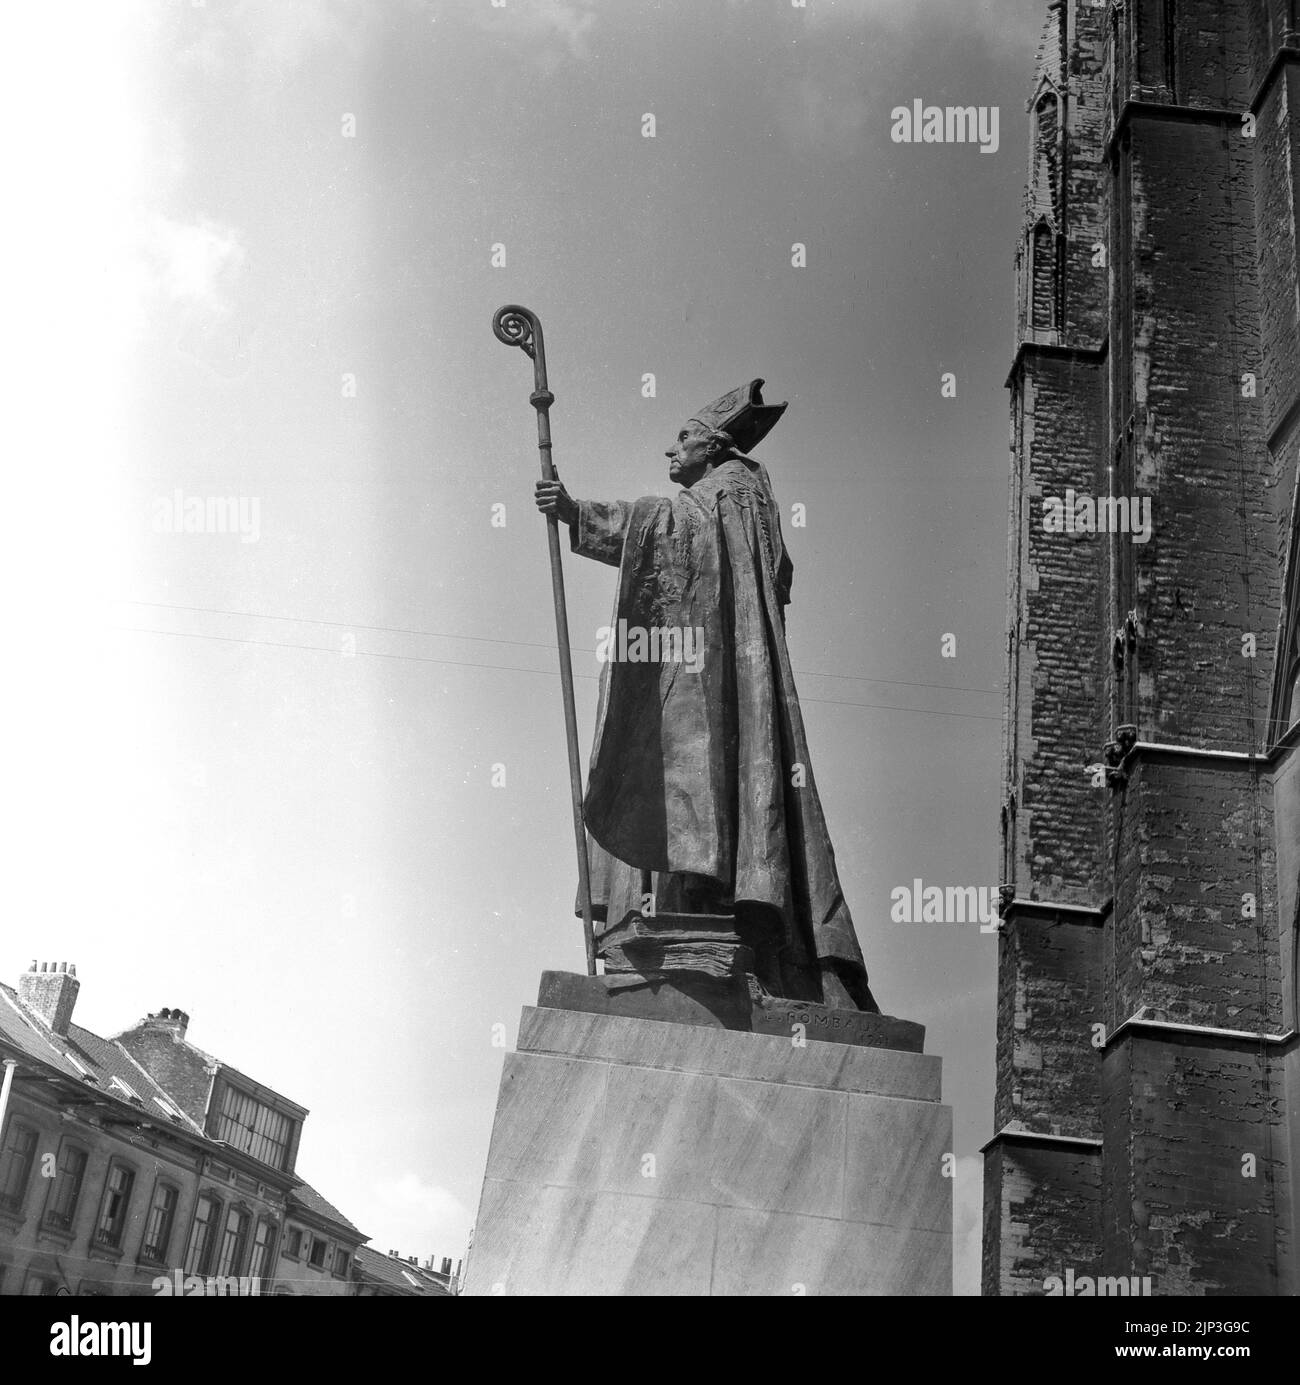 1960, historical, side view, from below, of a statute by Égide Rombaux of catholic priest Cardinal Mercier outside St. Michael and Gudula Cathedral, Brussels, Belgium. E. Rombaux, 1941 is inscribed on the base.  The statue shows the Cardinal in full dress carrying a staff, a crosier, with a curved top that is a symbol of the Good Shepherd. Desire-Joseph Mericer was known for his fierce resistance to the German occupation of the country during WW1, and as a noted scholar, distributed a letter, Patriotism and Endurance, after the invasion to be read in all his churches. Stock Photo